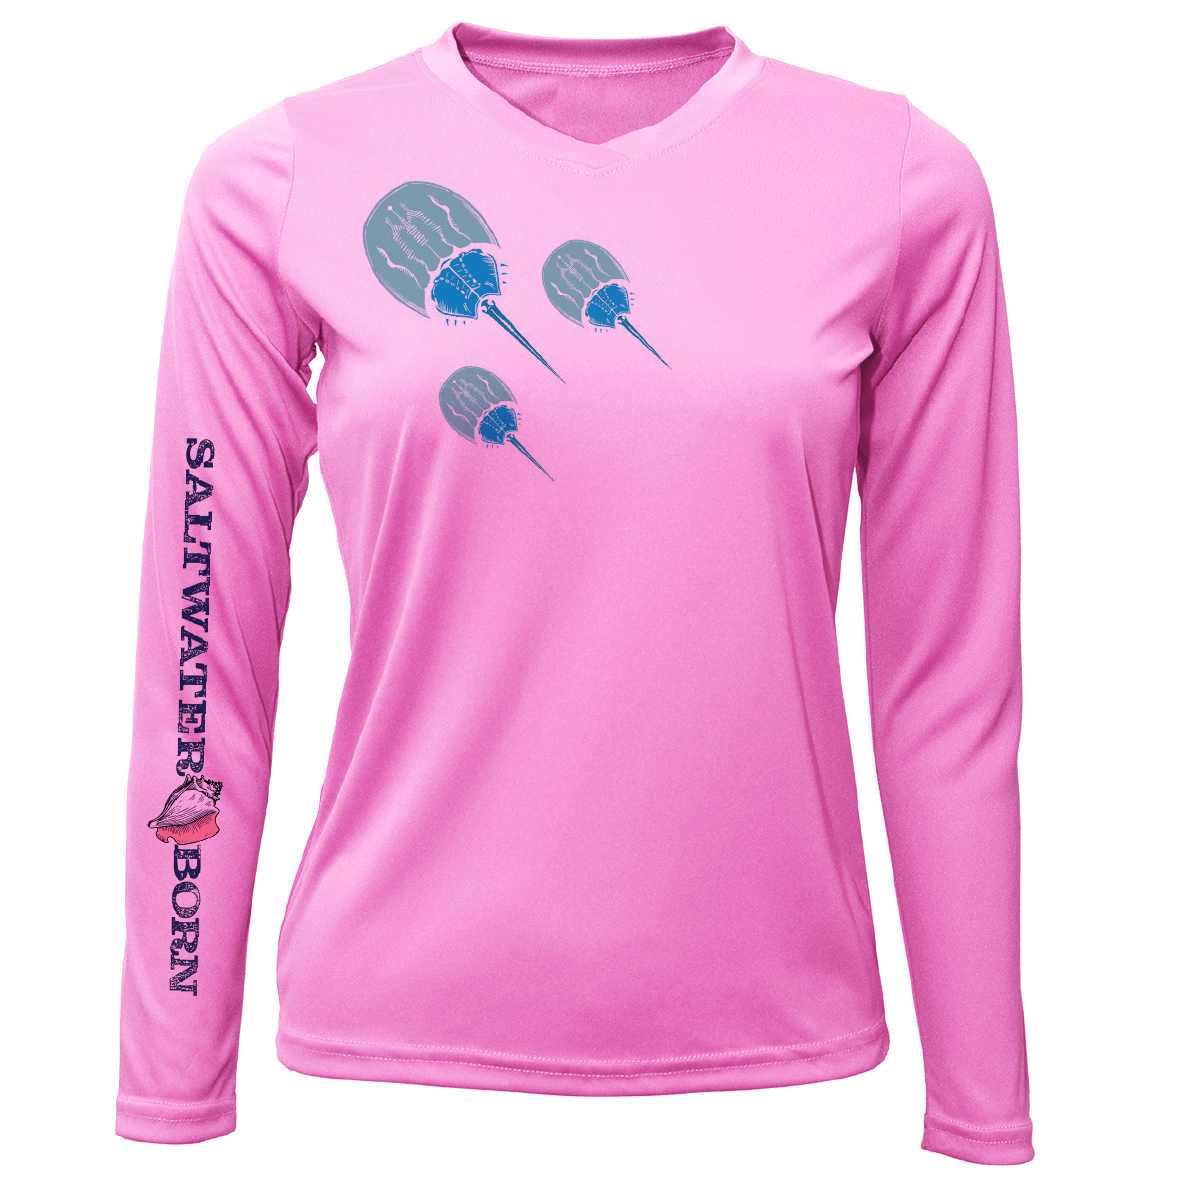 Key West Horseshoe Crab Women's Long Sleeve UPF 50+ Dry-Fit Shirt in Ice Blue | Size Small